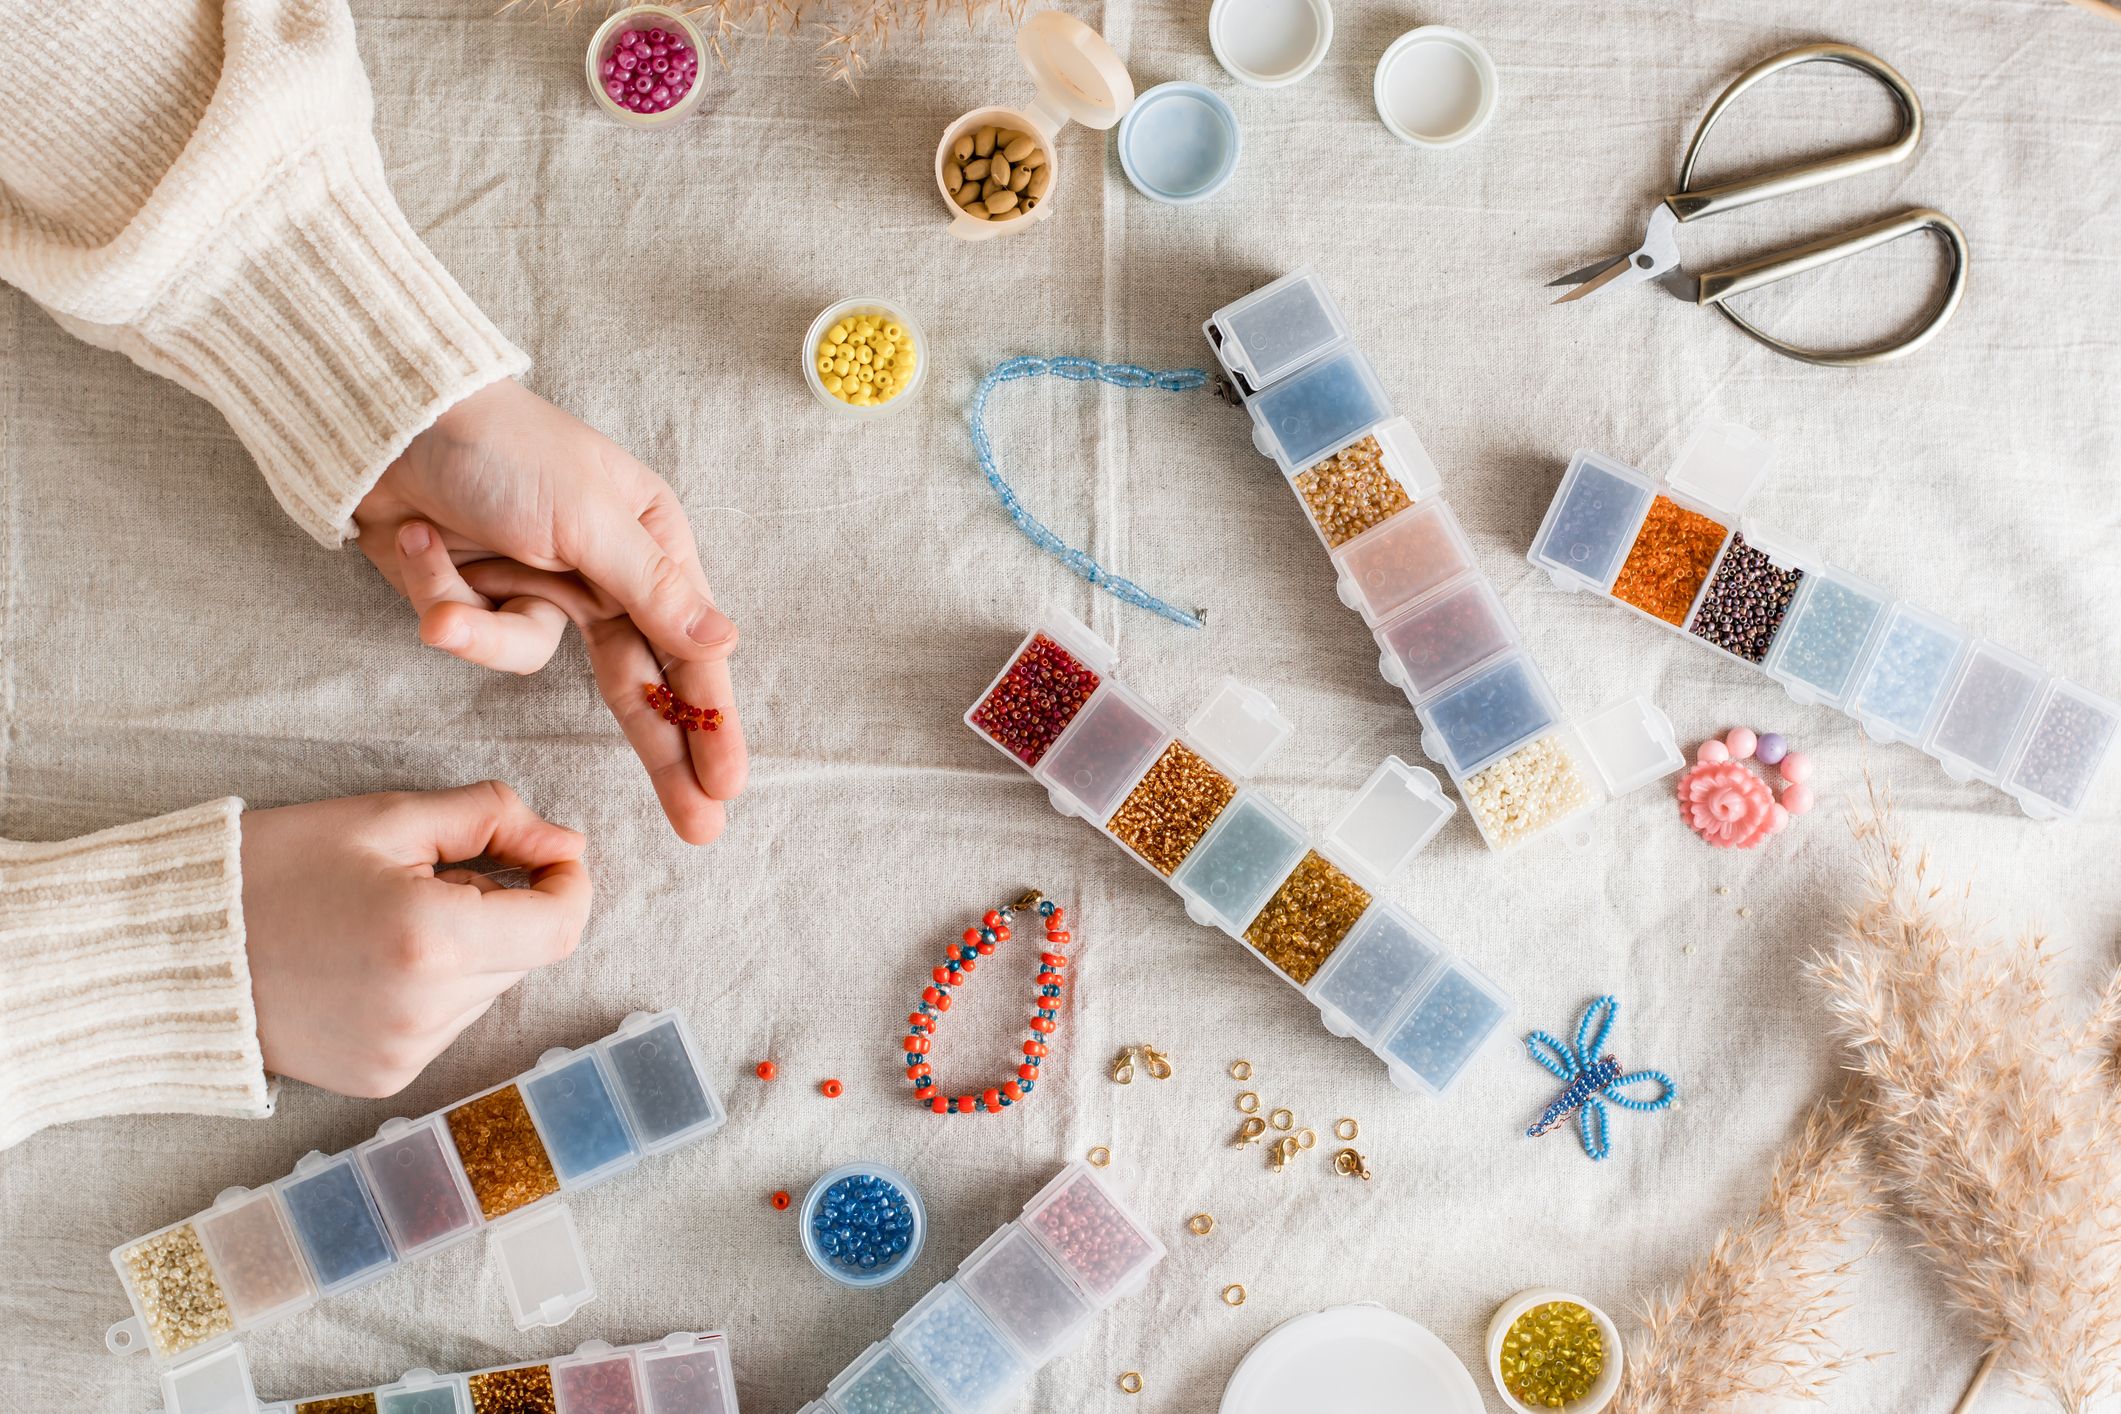 20 of the Best Adult Craft Kits to Gift or Make Yourself